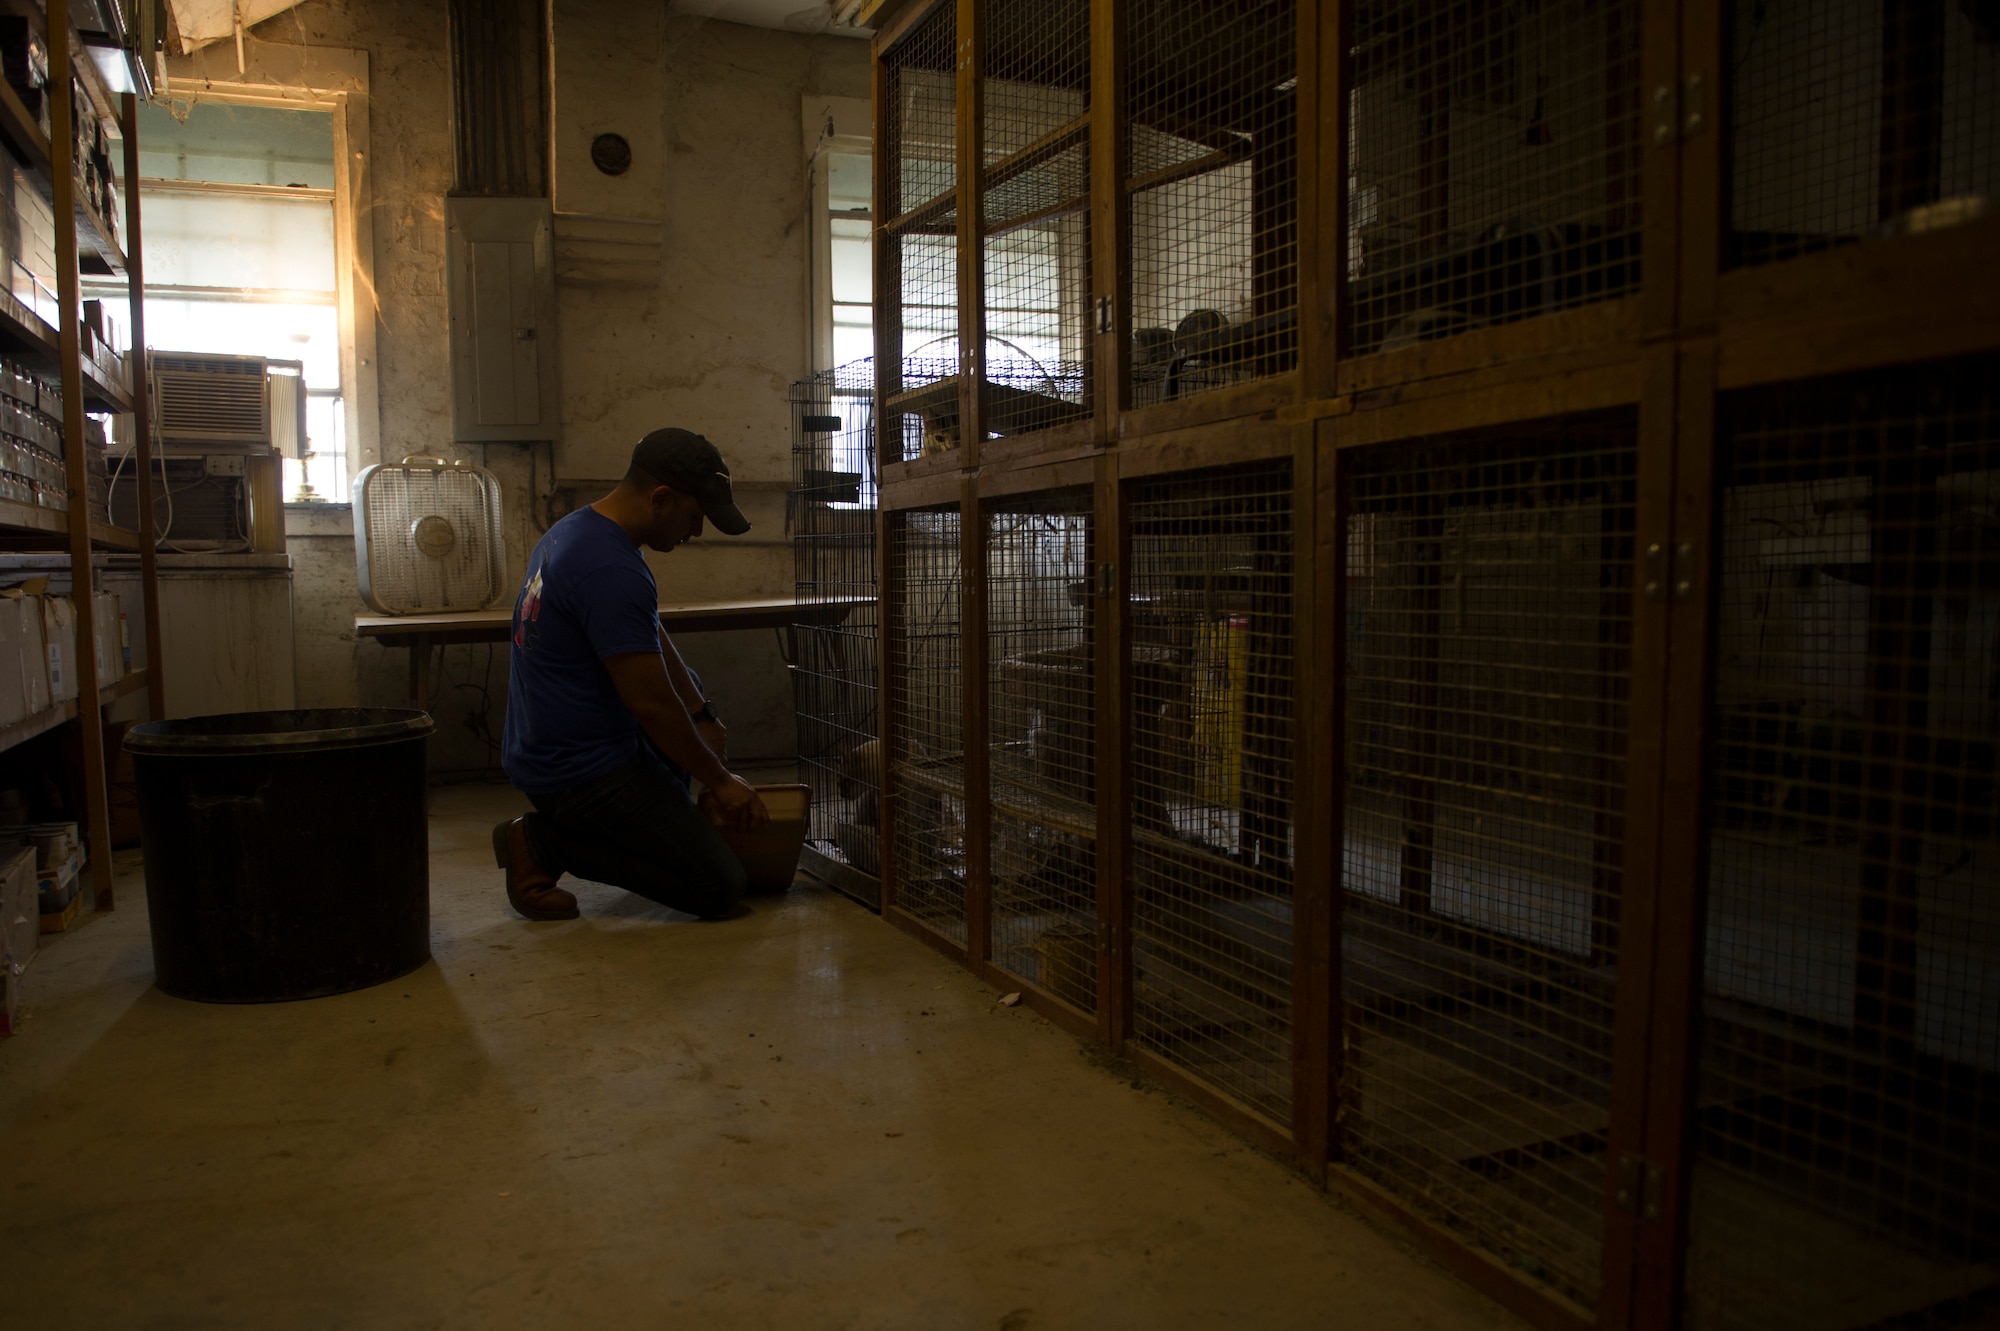 Tech. Sgt. Arturo Garcia, 47th Student Squadron command support staff NCO in charge, cleans a cat litter box at an animal shelter in Del Rio, Texas, March 3, 2018. With nearly 500 volunteers that day, the 47th Student Squadron dedicated approximately 15,000 man hours to serving the local community. (U.S. Air Force photo/ Airman 1st Class Benjamin N. Valmoja)